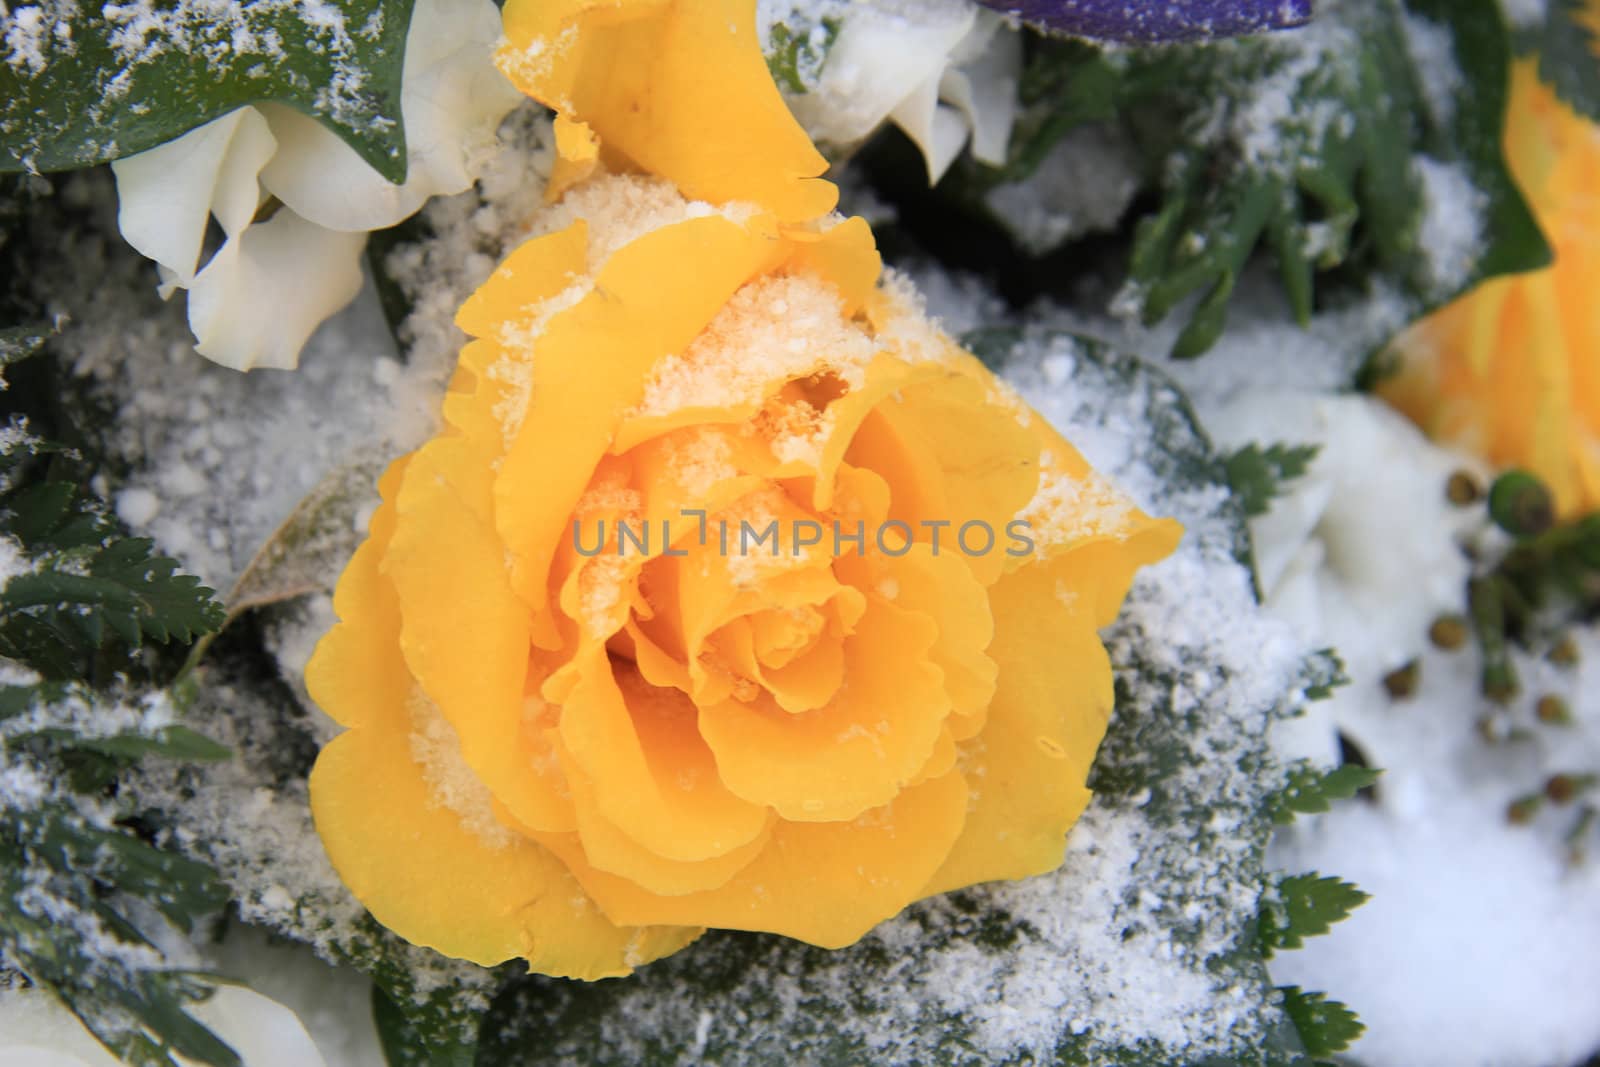 A bright yellow rose in the snow